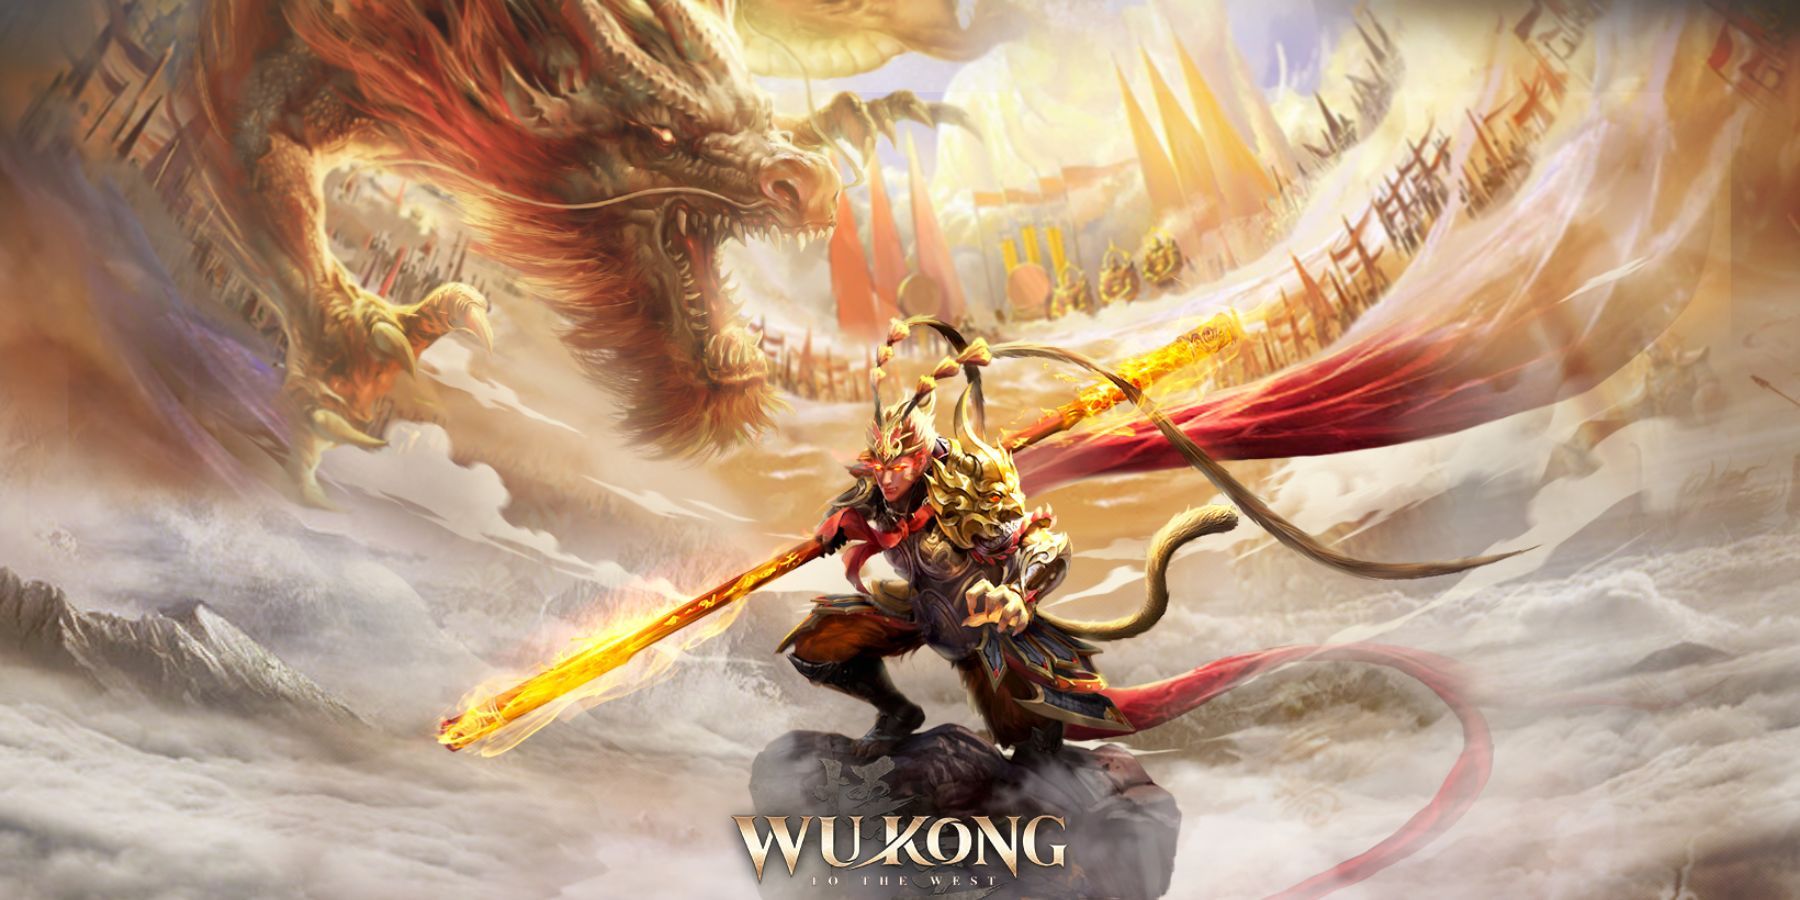 Wukong M To The West Codes